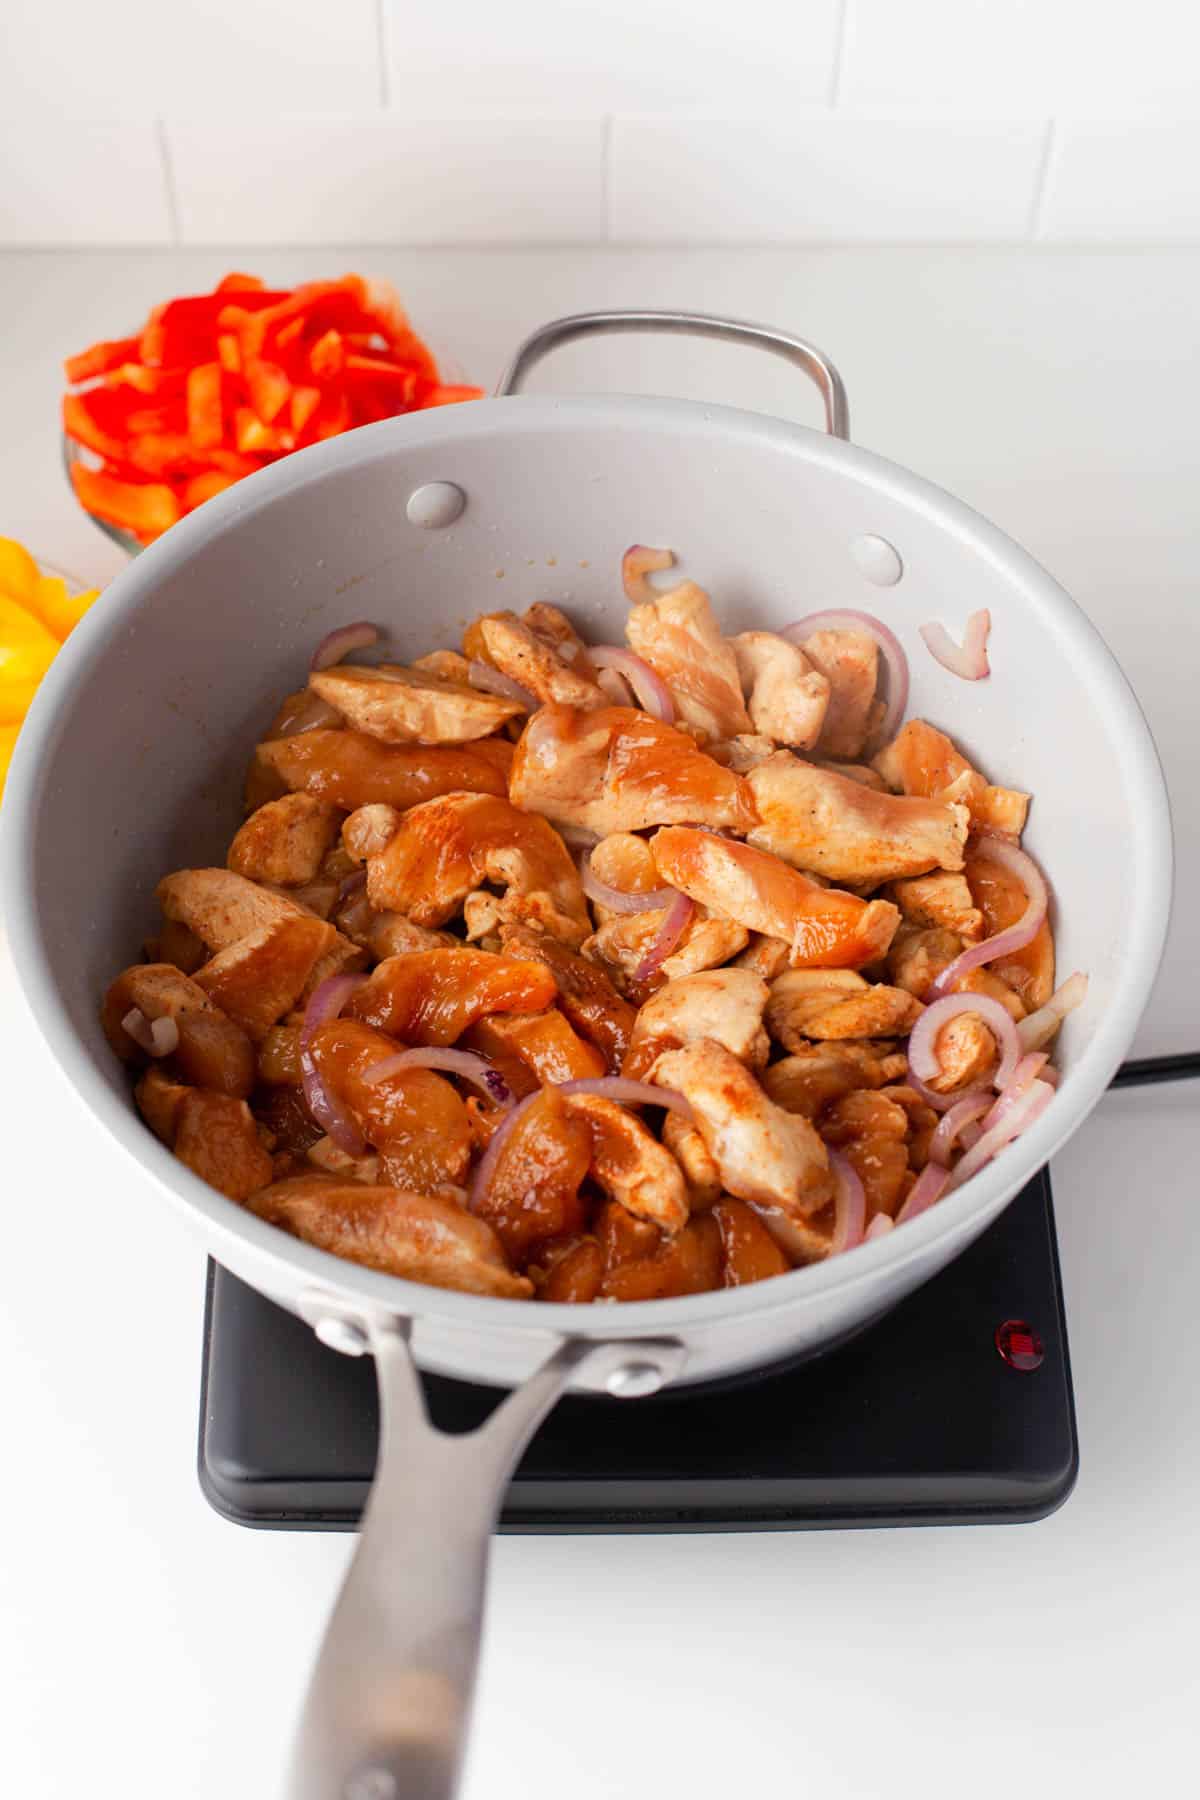 Cooking sliced chicken pieces in a large pan with fajita seasoning.